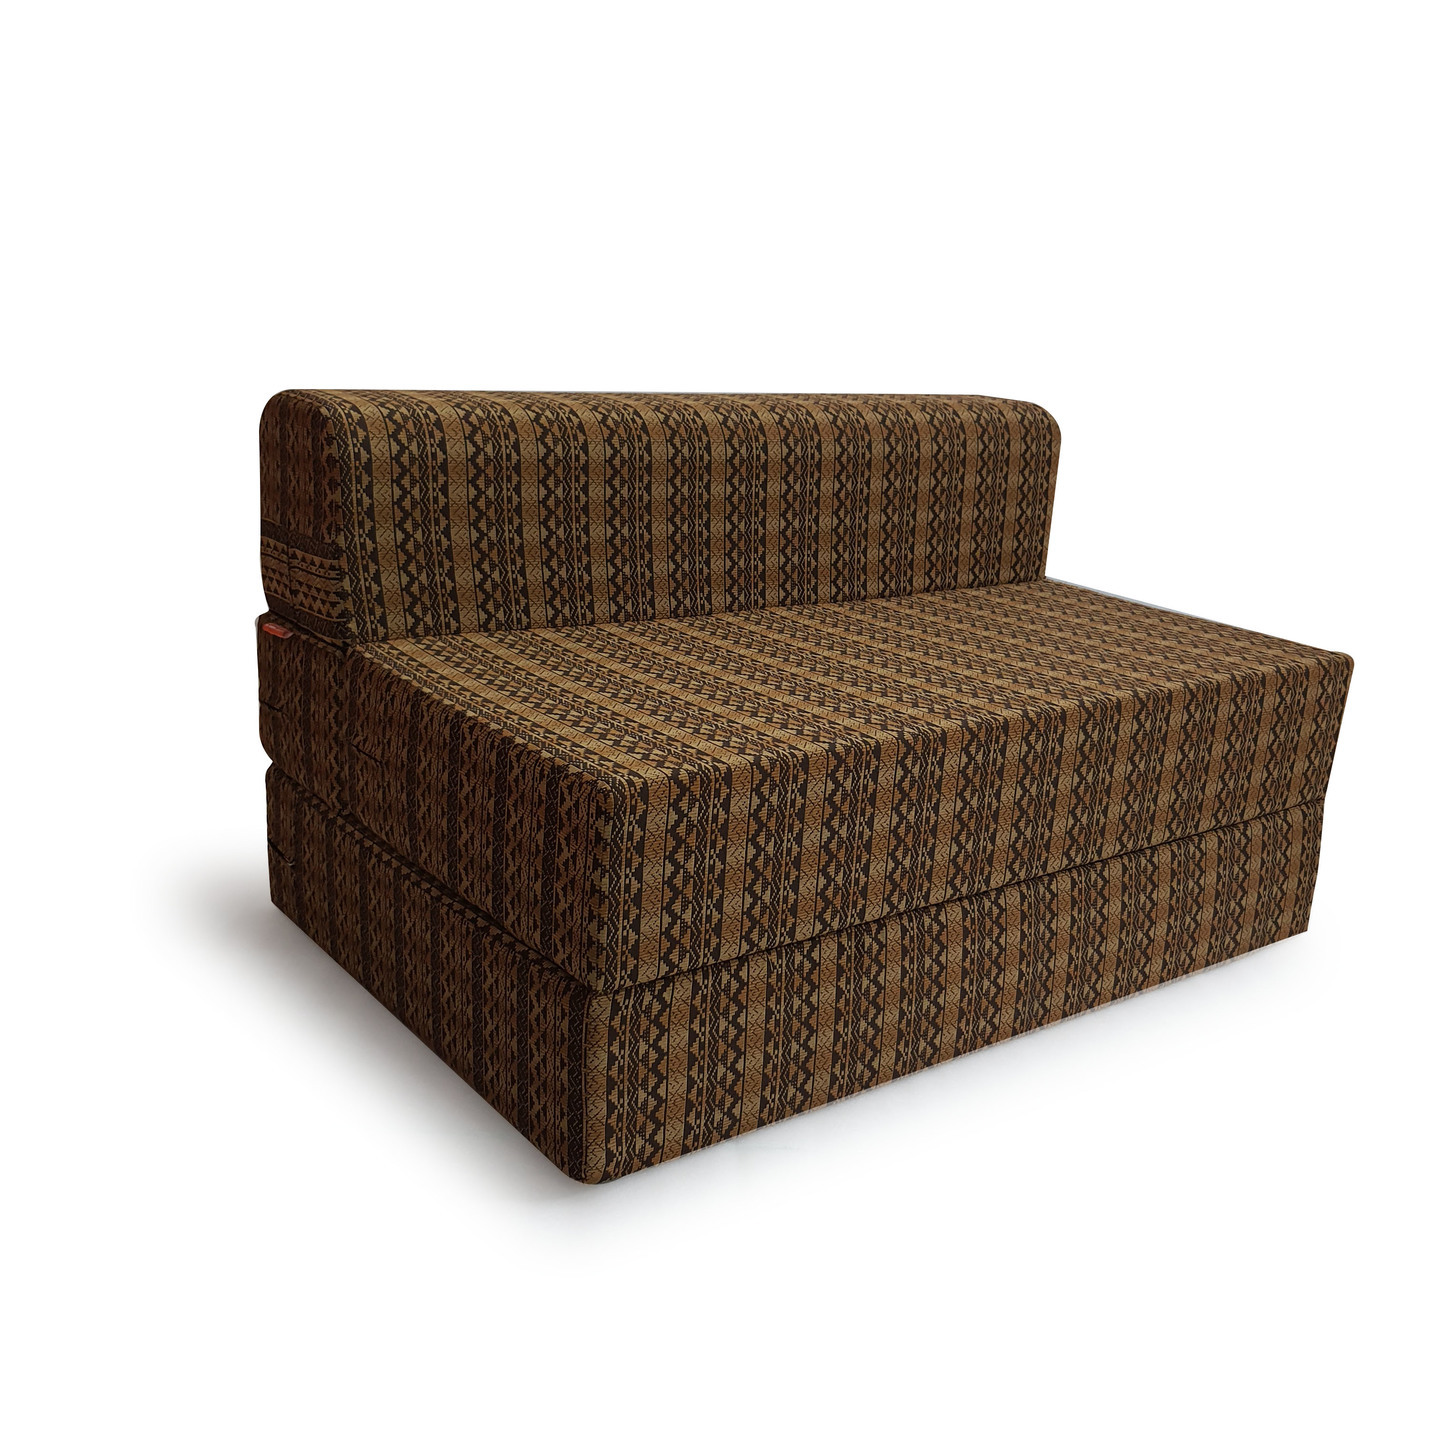 Premium Sofa Bed - Brown Choose your size